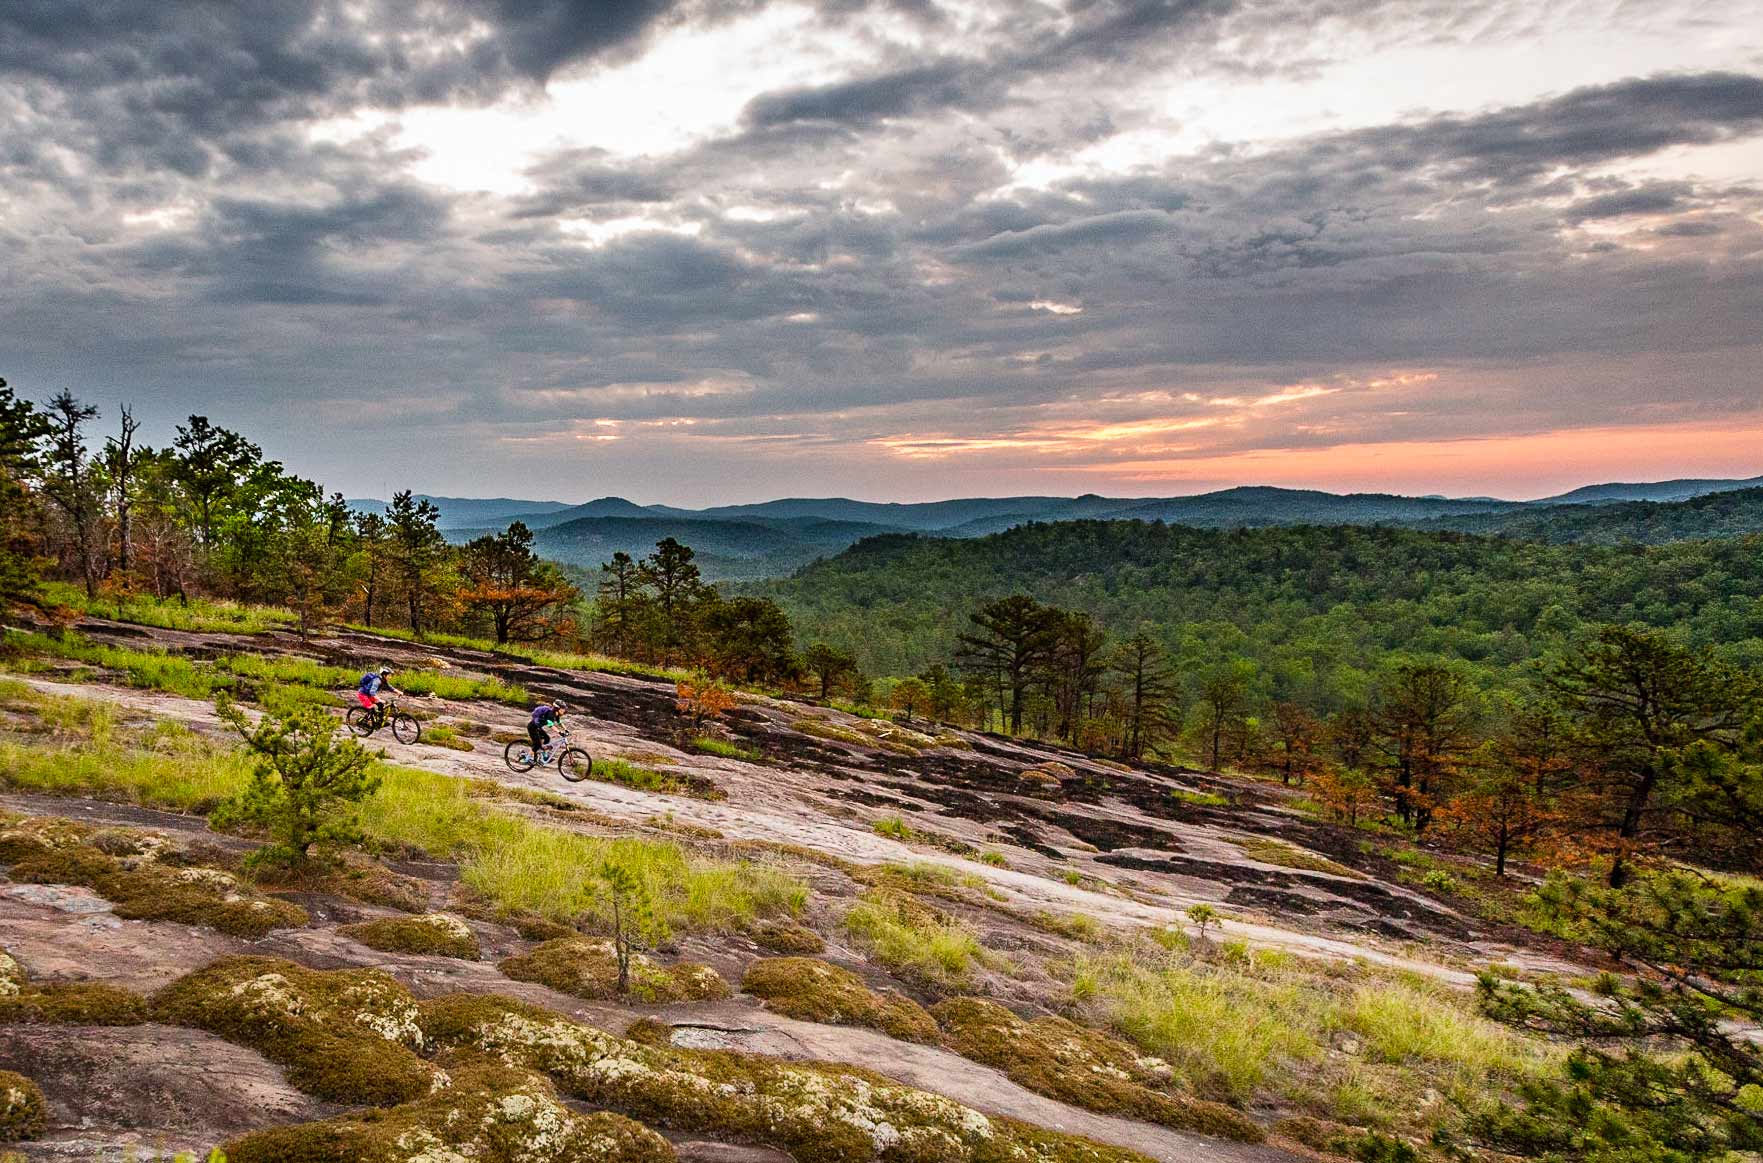 Tow mountain bikers riding over smooth rock terrain with a mountain view at the Bike Farm